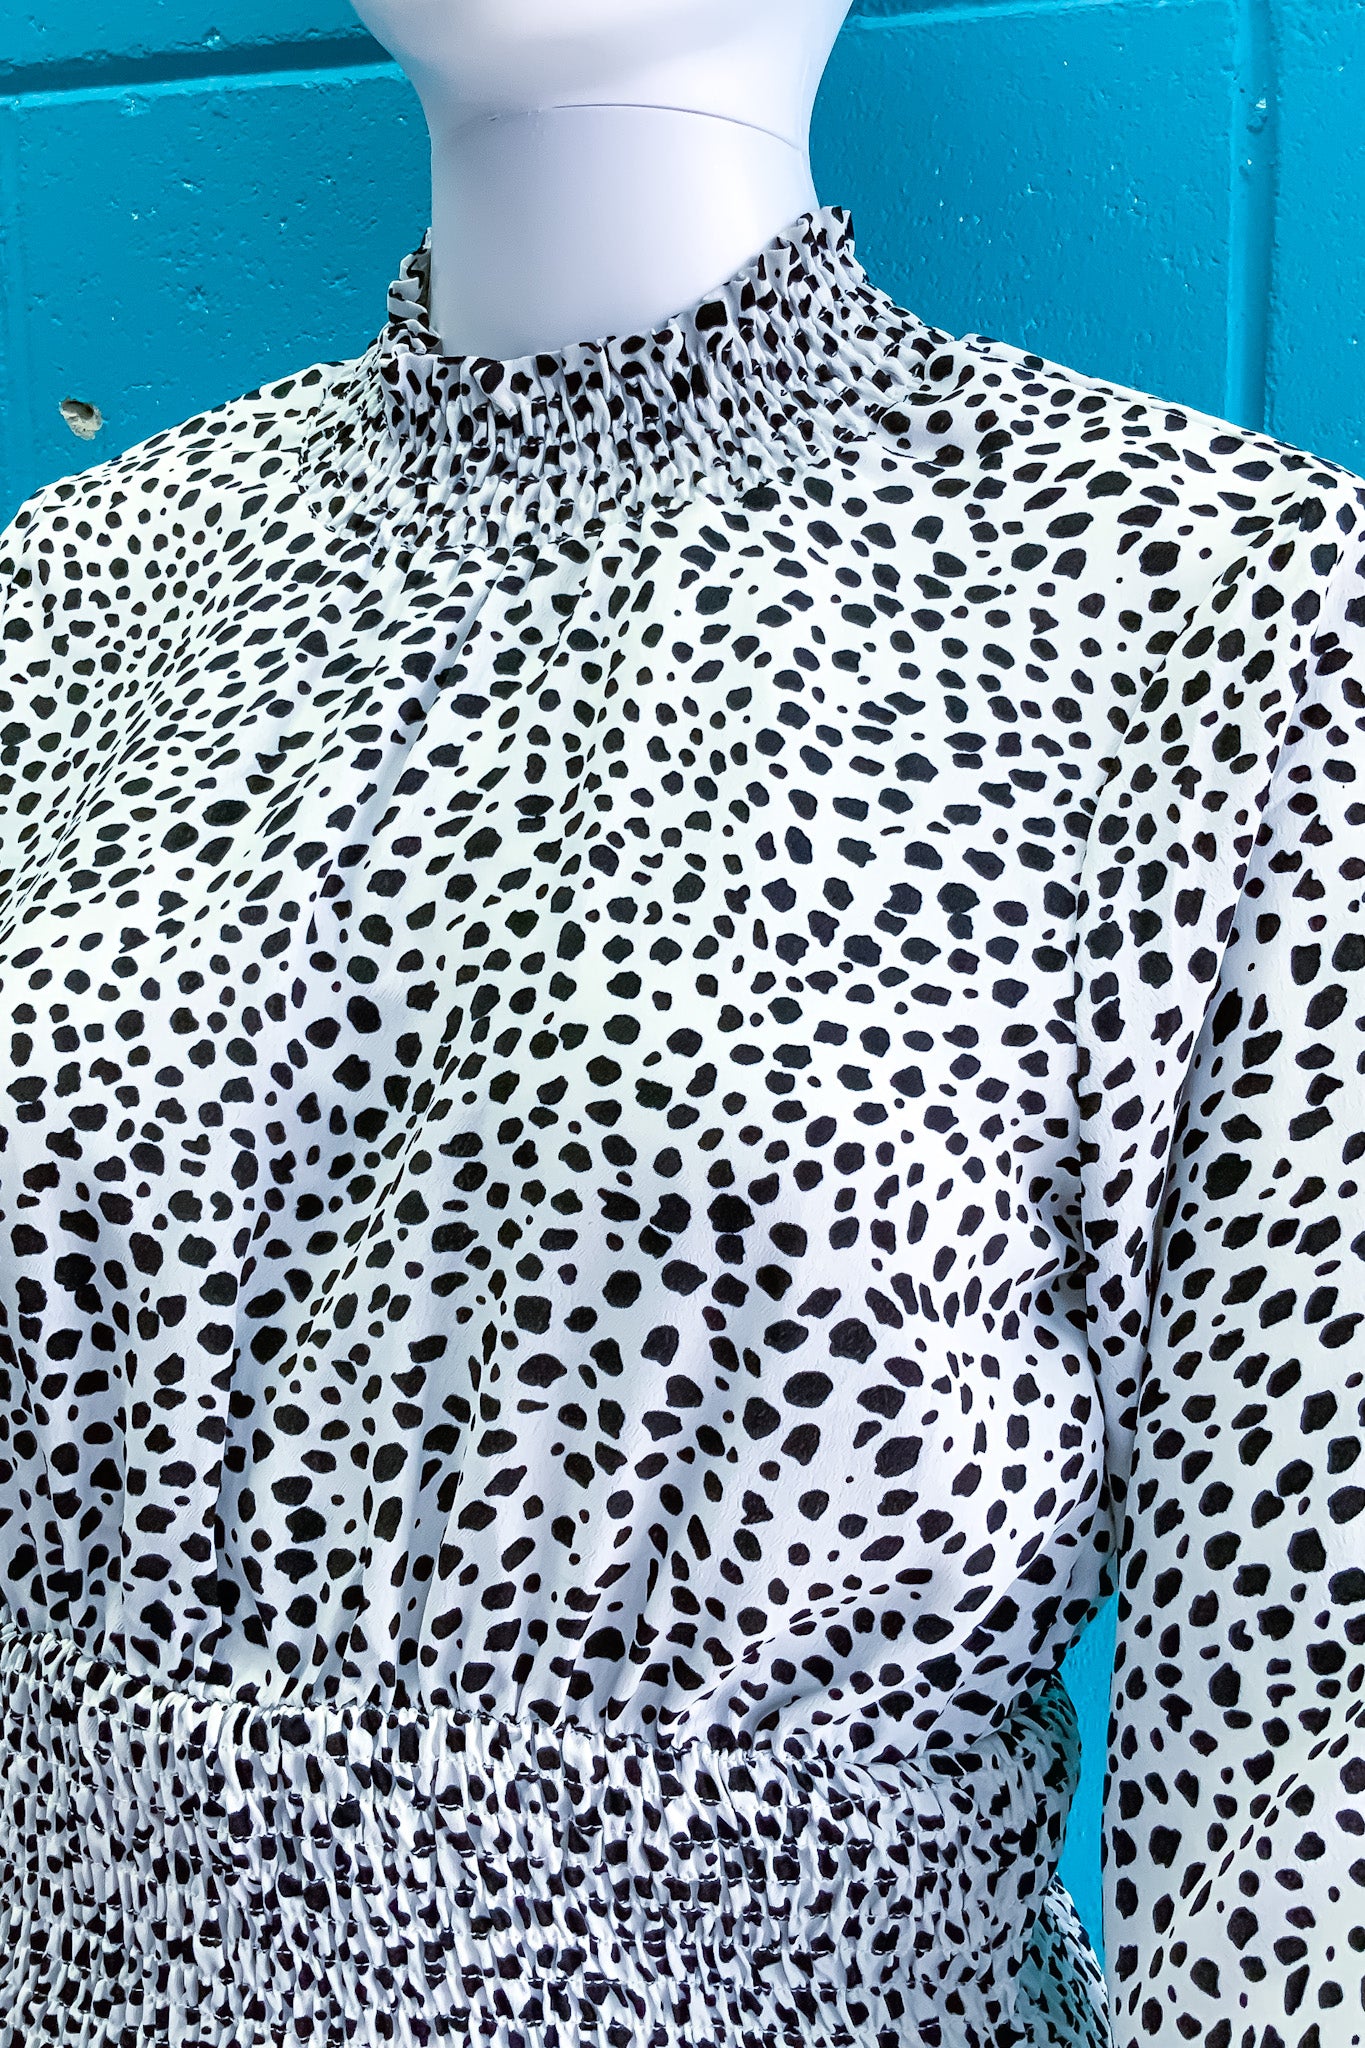 MISSGUIDED Ruched Monochrome Spotty Print High Neck Top - Size 10